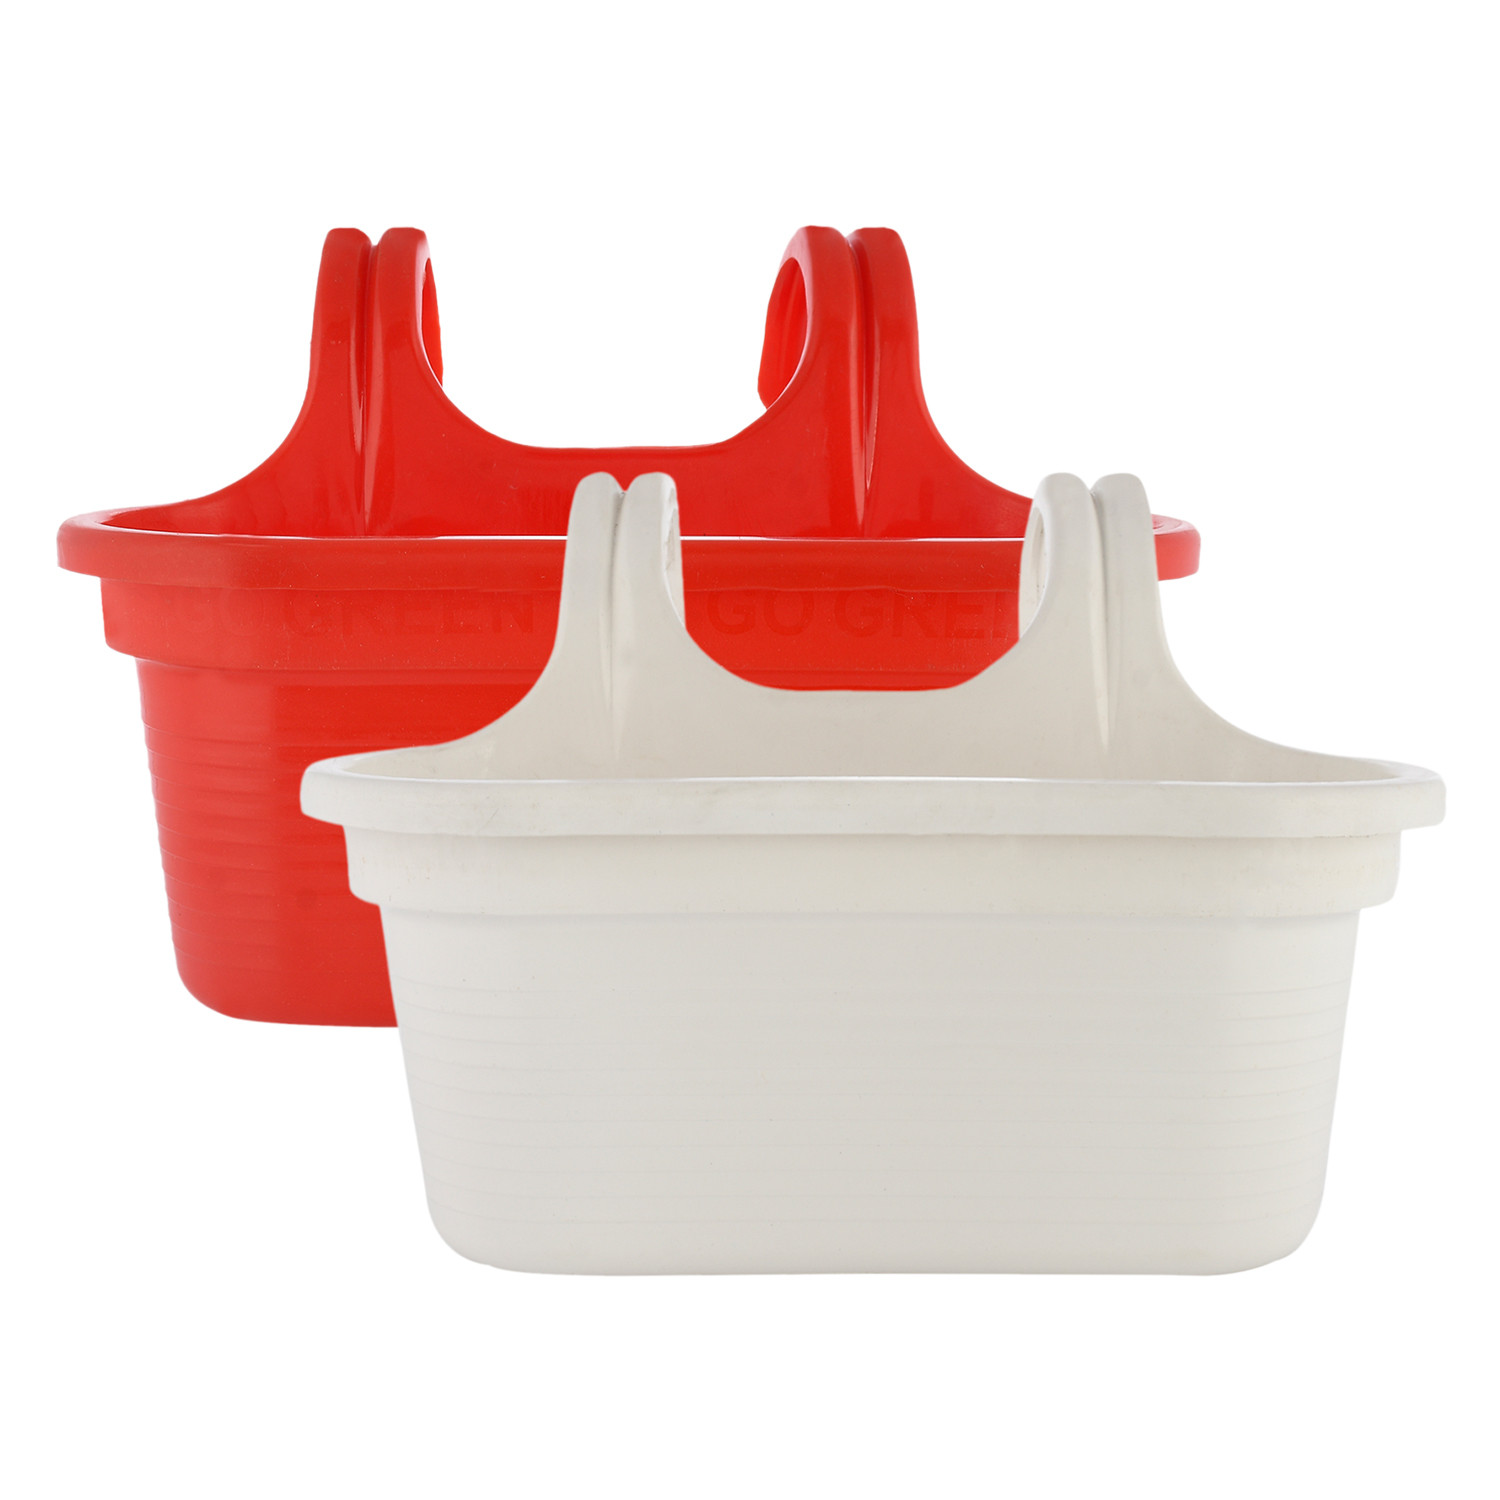 Kuber Industries Hanging Flower Pot|Double Hook Plant Container|Durable Plastic Glossy Finish Pots for Home|Balcony|Garden|12 Inch|Pack of 2 (White & Red)